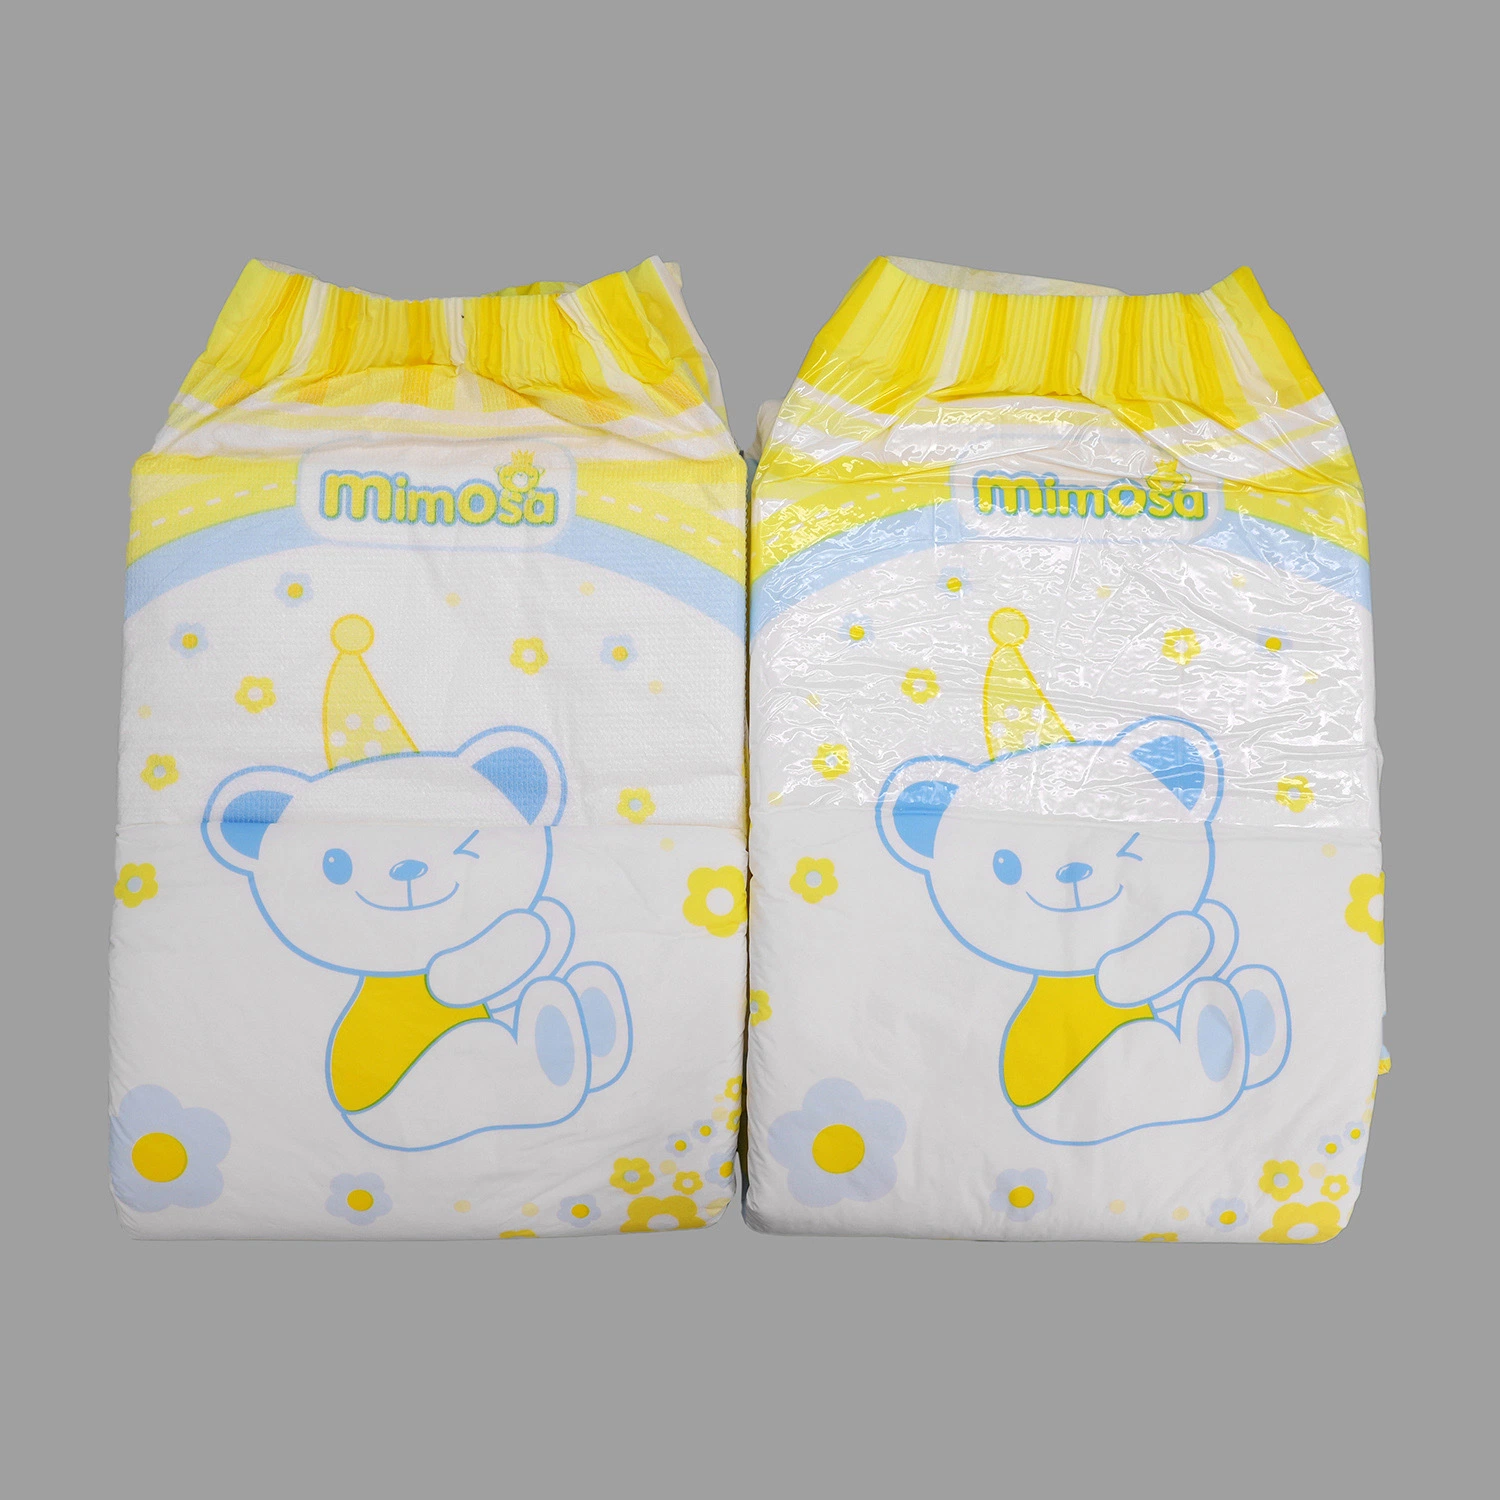 Diaper Factory Plastic Disposable Adult Pull Diaper up, Free Adult Diapers Pants Made in China Hot Products